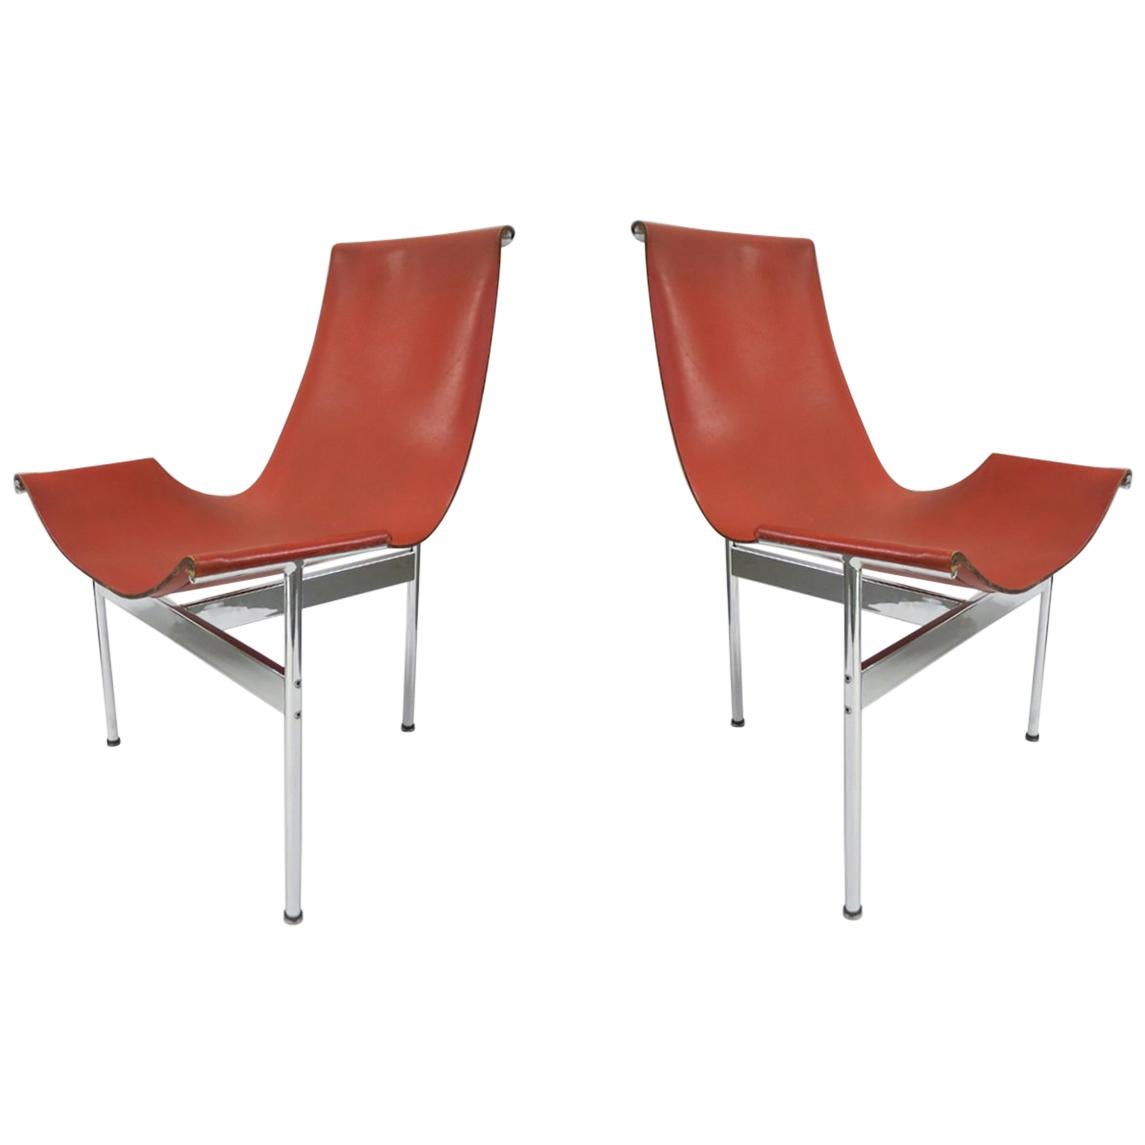 2 Original T-Chairs by Katavolos, Kelly, Littell for Laverne, 1967